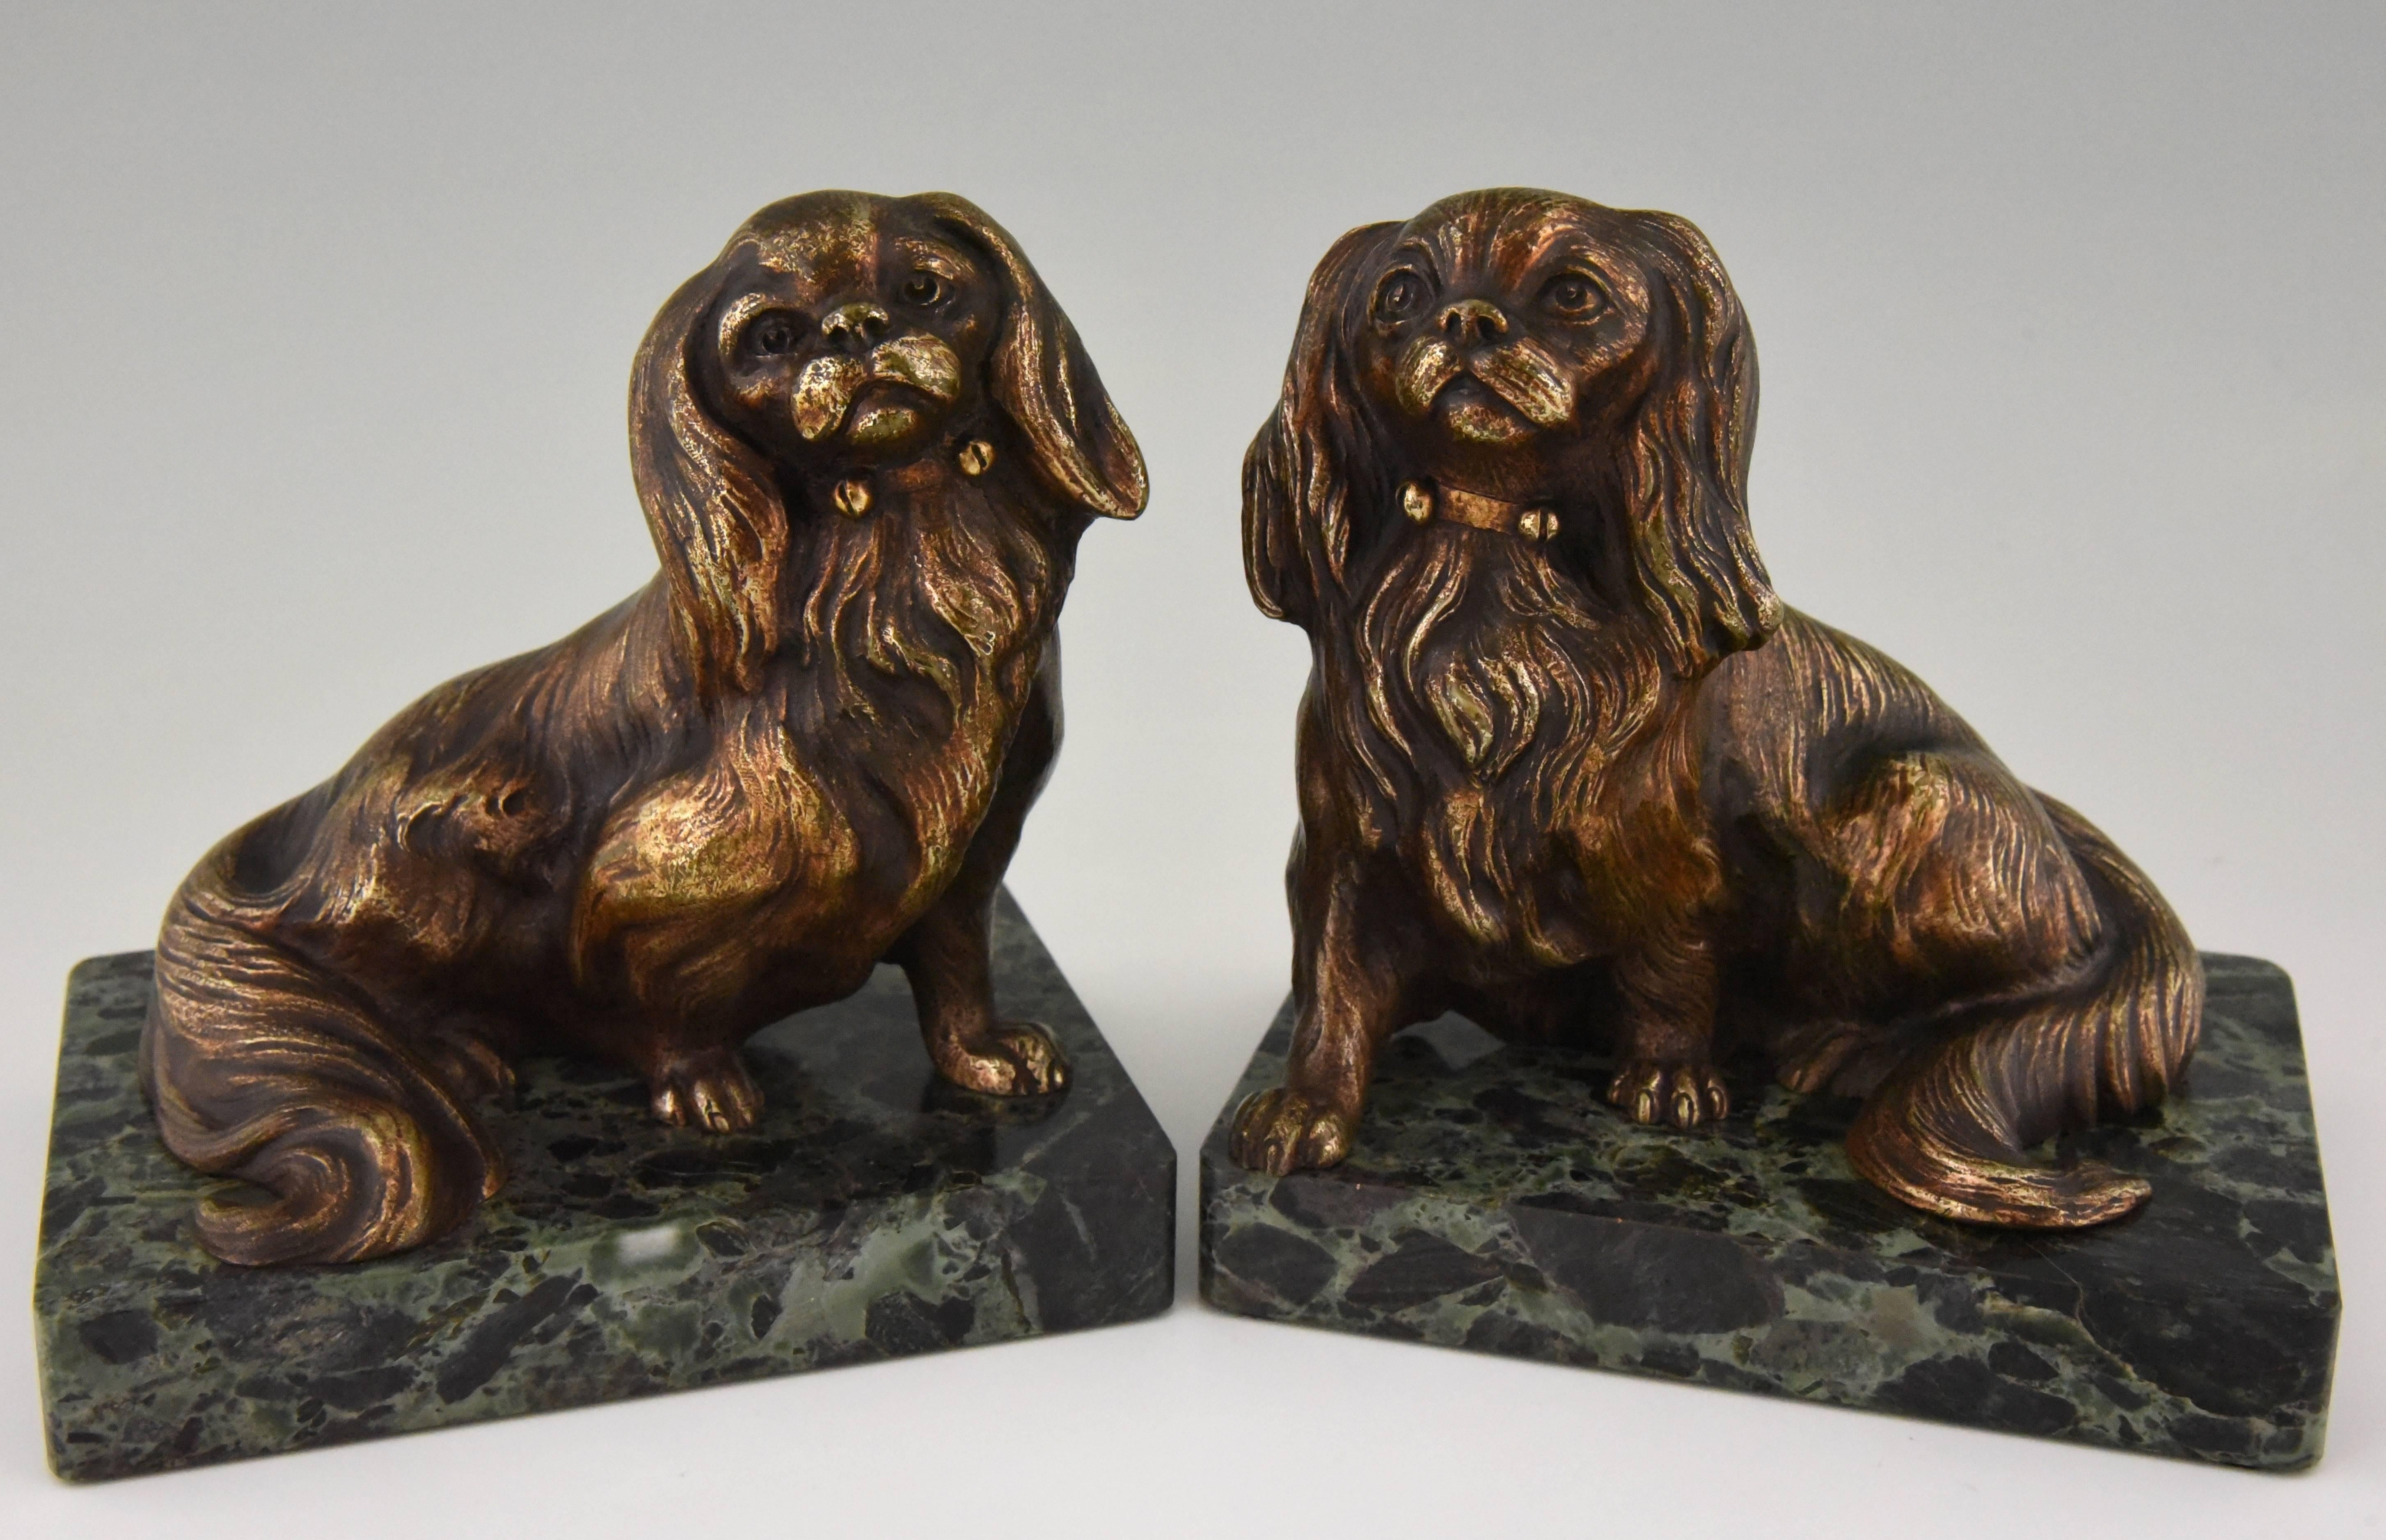 Hard to find Art Deco bronze bookends, Cavalier King Charles spaniel dogs by Louis Albert Carvin, Etling Foundry signature. 

Artist/ maker: Louis Albert Carvin.
Signature/ marks: Carvin. Foundry seal etling.
Style: Art Deco
Date: